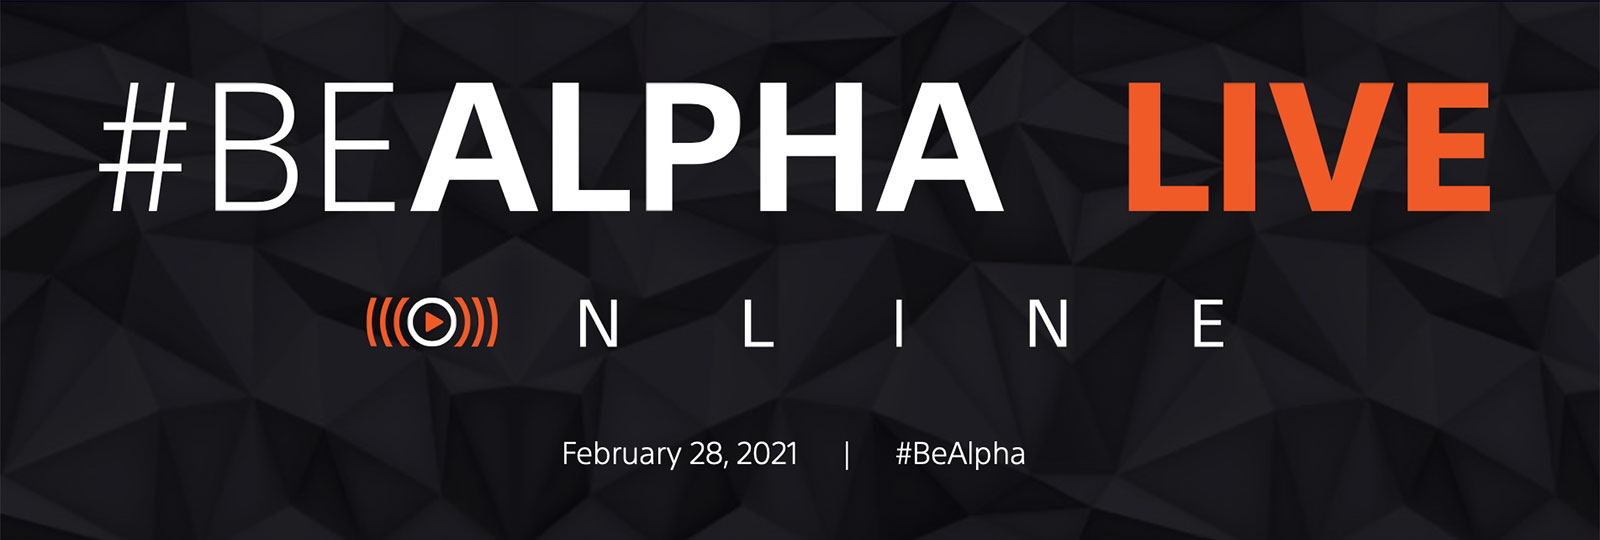 Be Alpha Live Online February 28, 2021